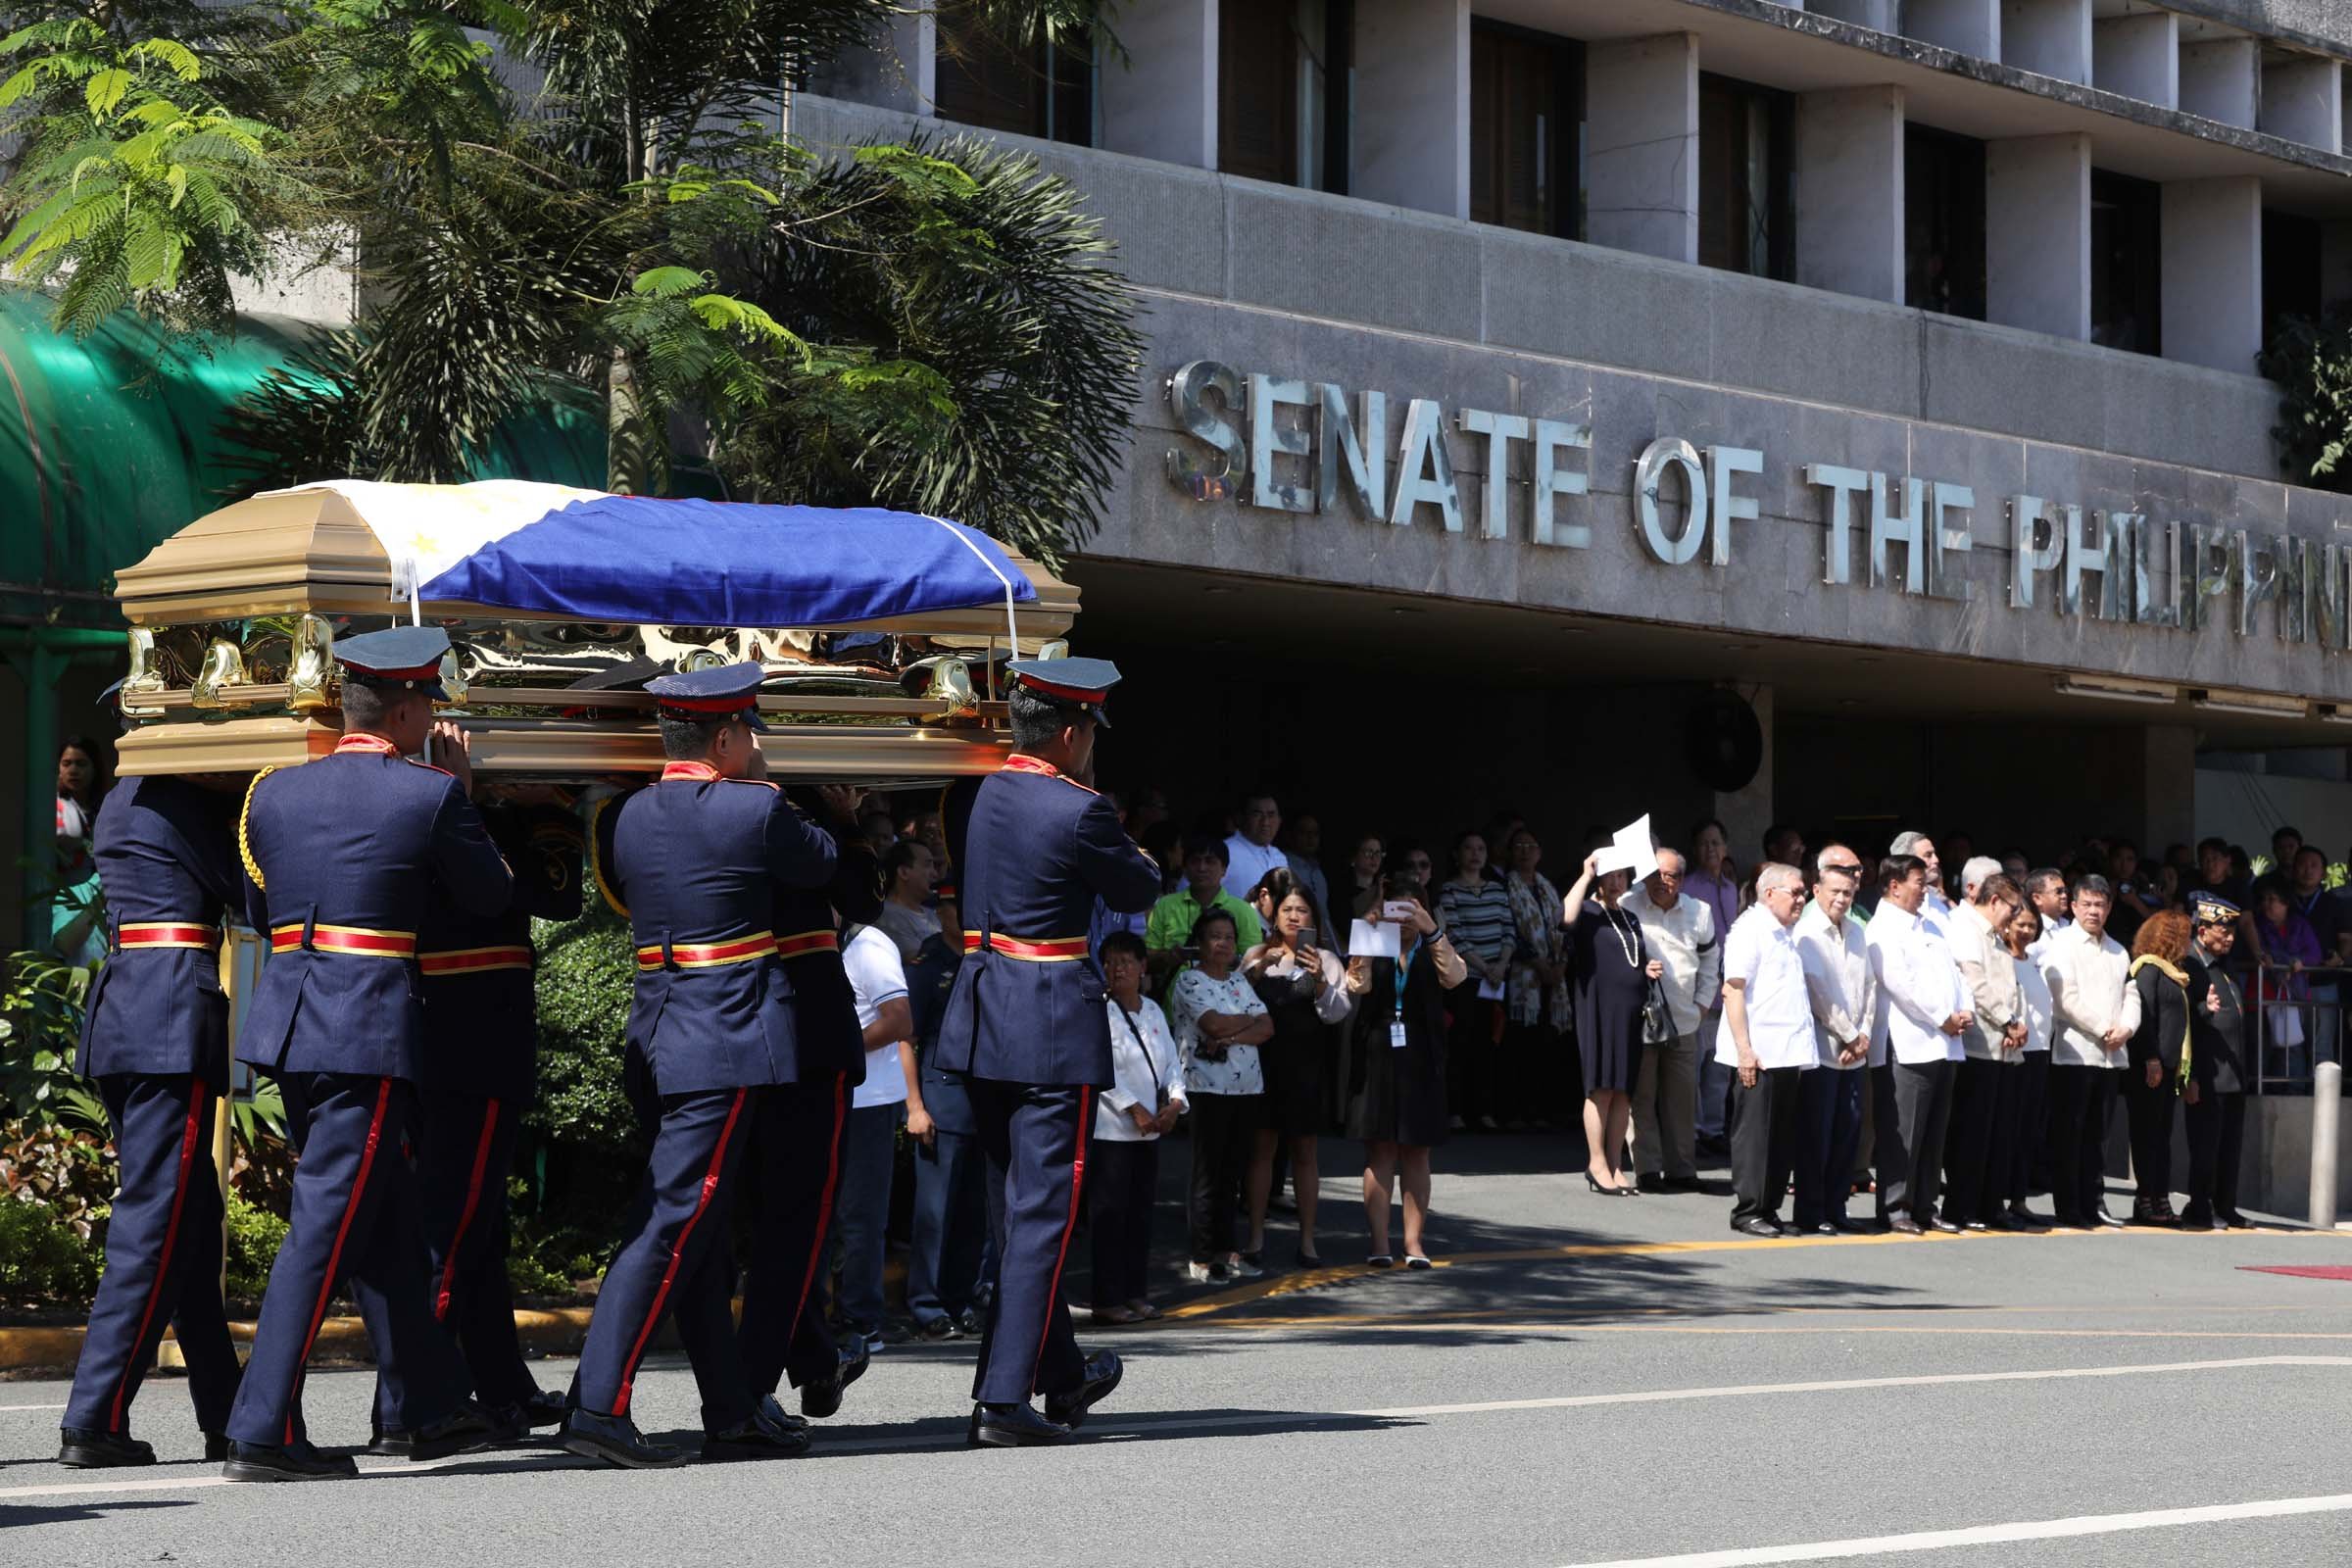 Remains of late Senator Leticia Valdez Ramos-Shahani brought to the Senate for necrological services